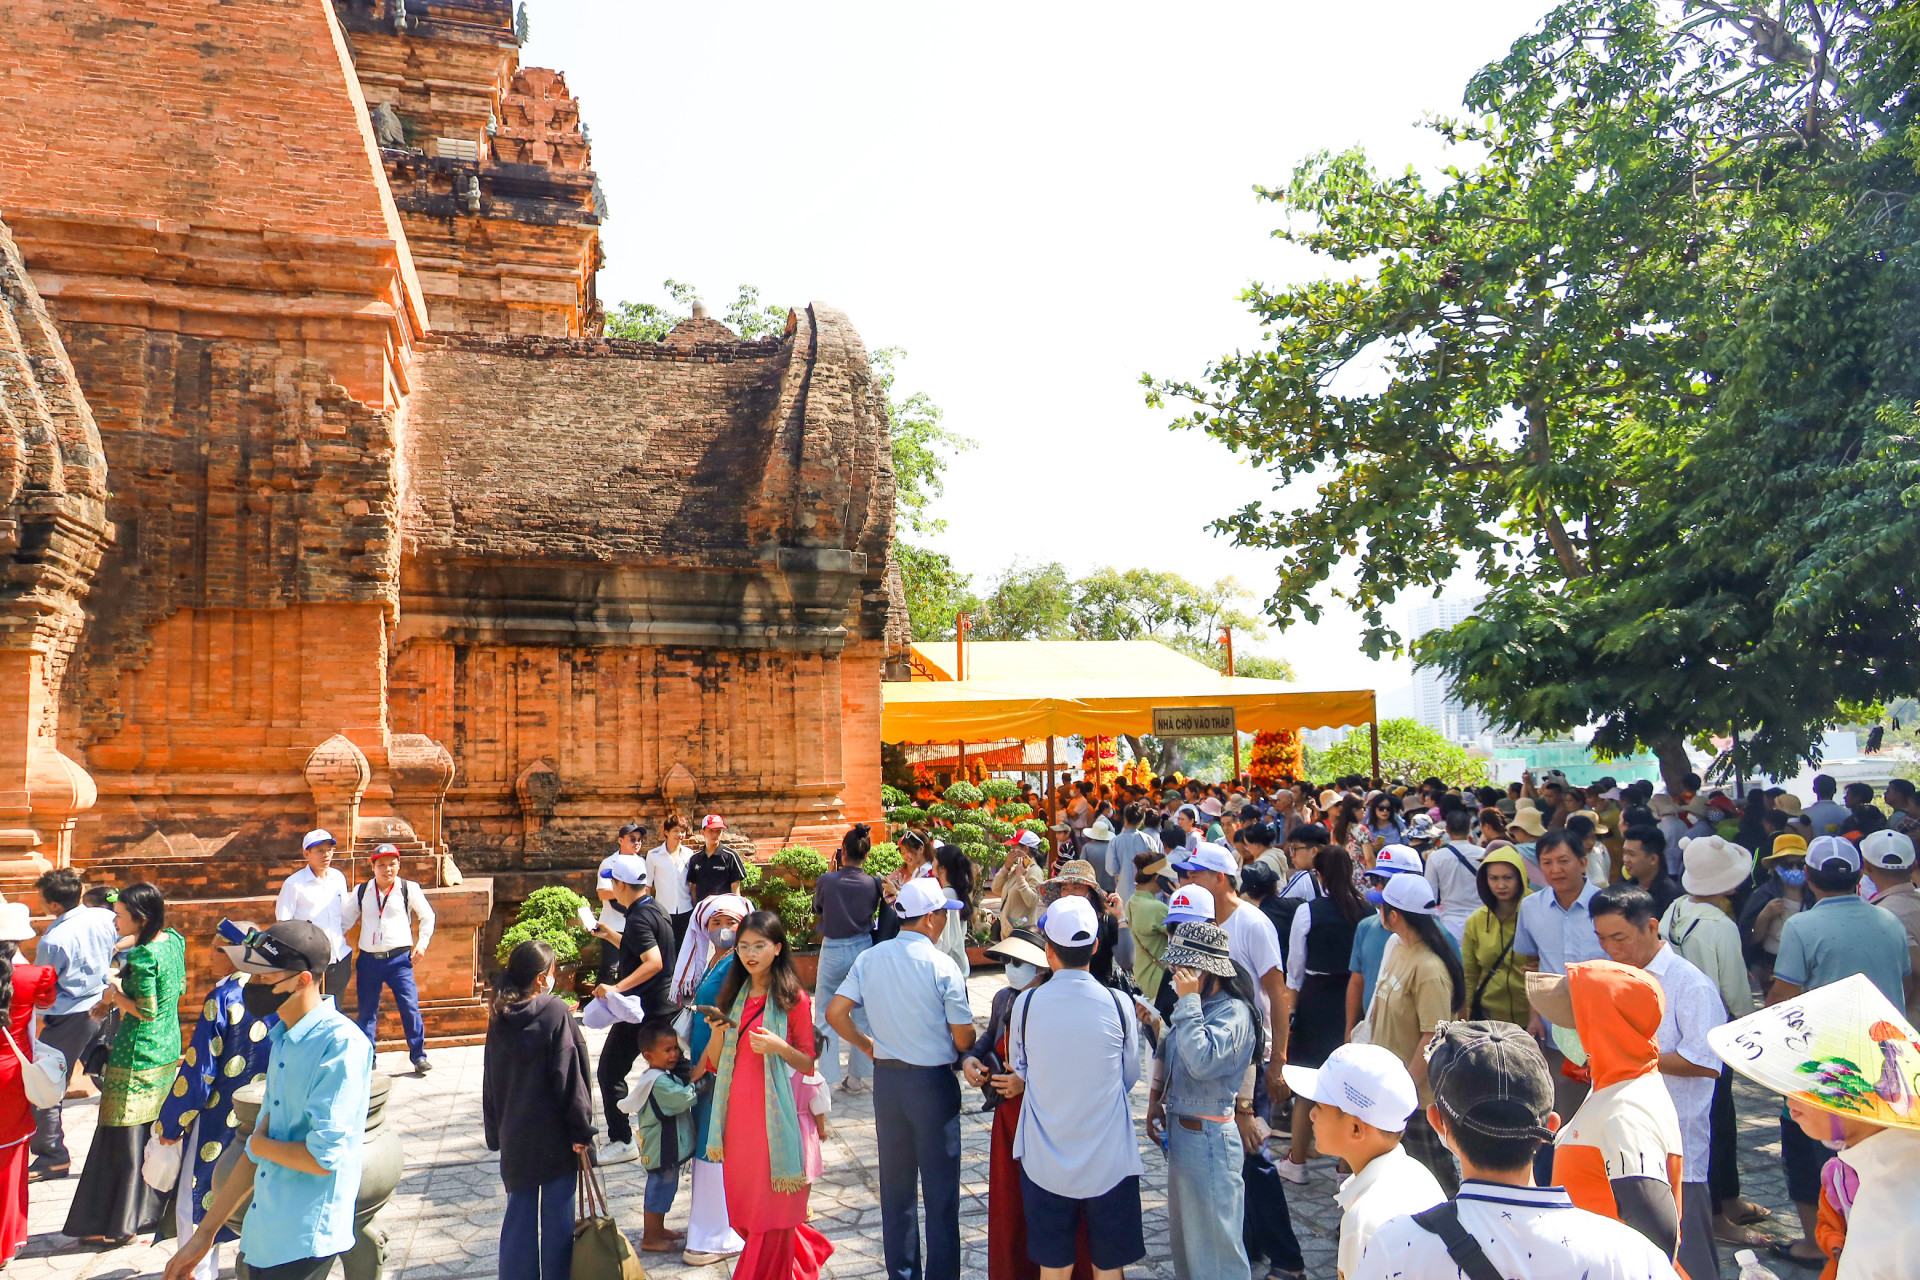 Ponagar Temple is crowded with people during Ponagar Temple Festival 2024

